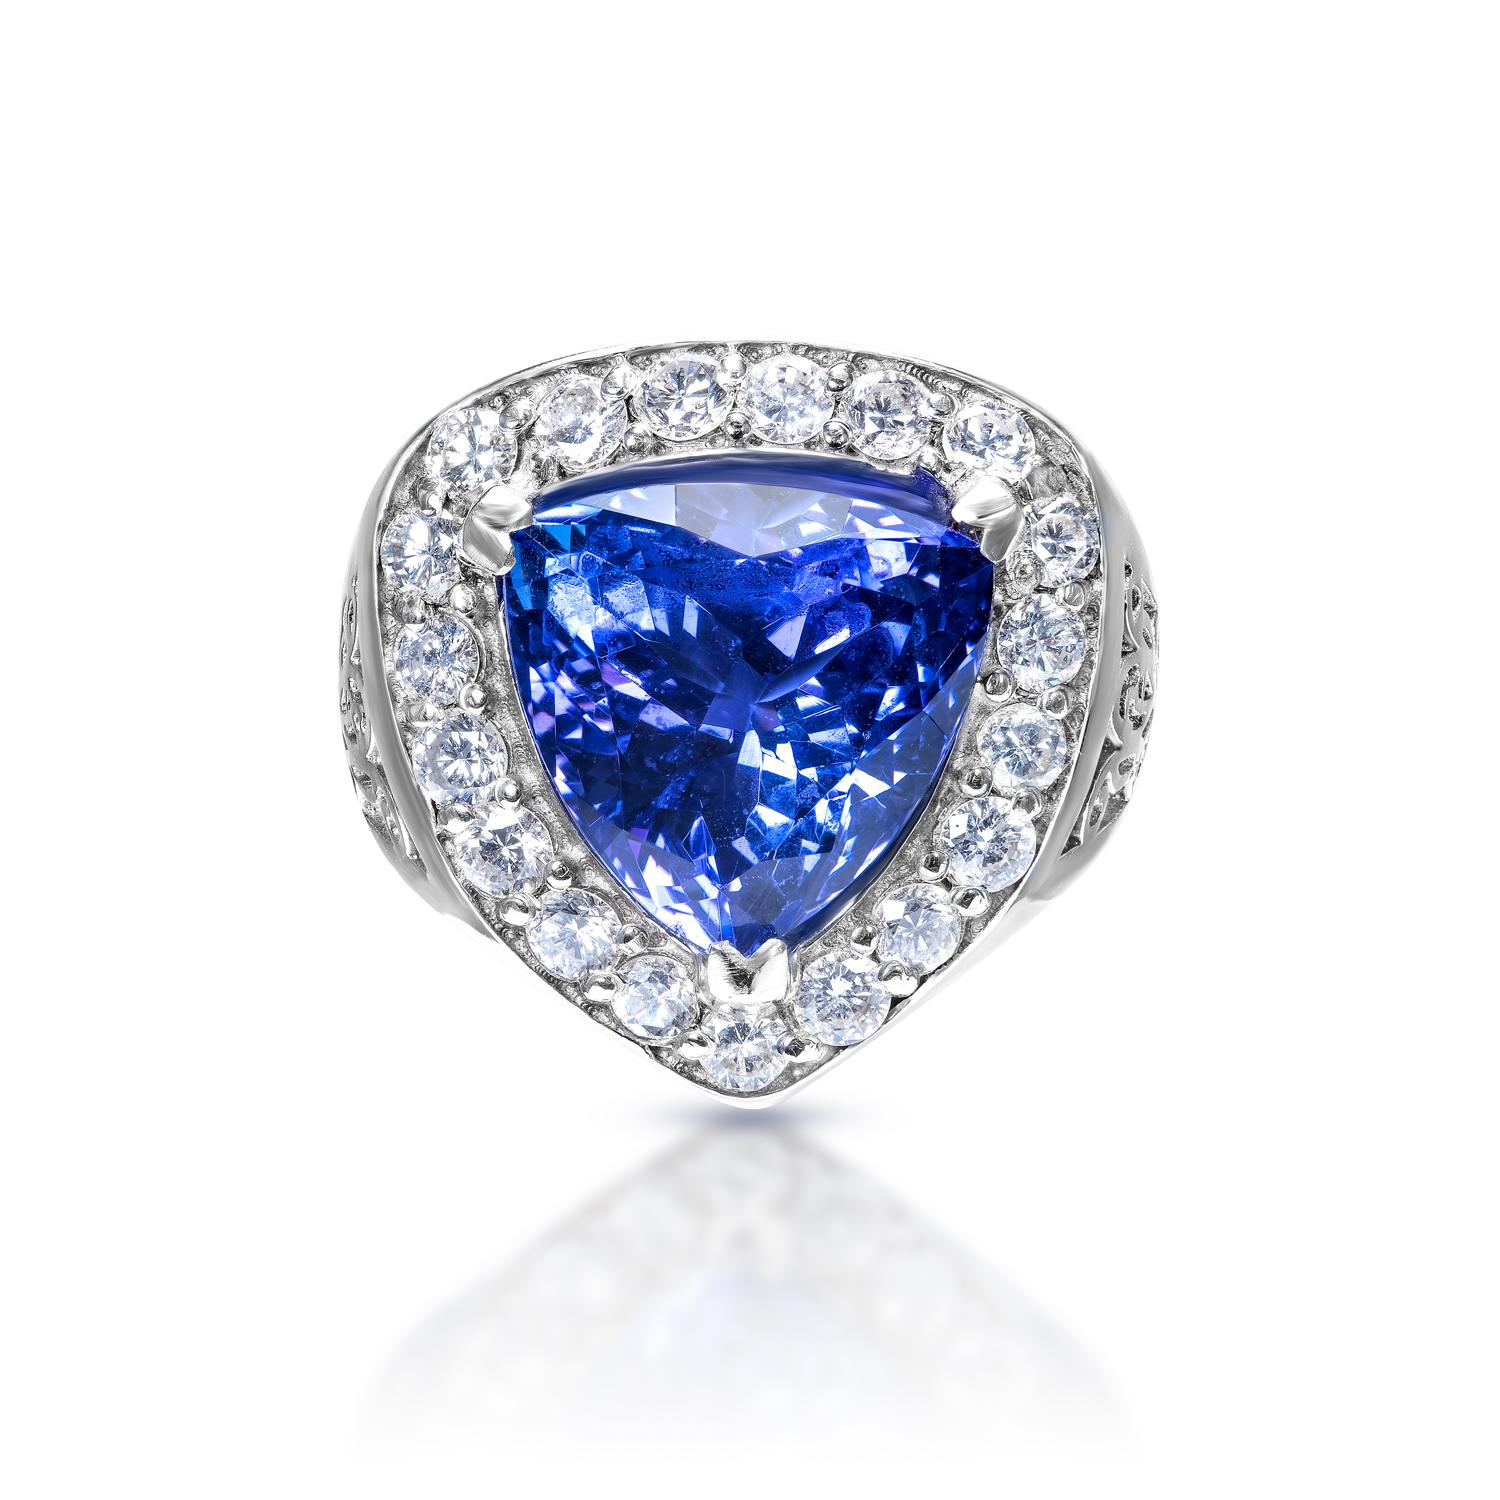 Center Stone Blue Tanzanite Ring:
Carat Weight: 9.06 Carats
Color: Blue Tanzanite
Clarity:  AAA
Style: Trilliant Cut


Diamond:
Carat Weight: 1.30 Carats
Shape: Round Brilliant Cut
Settings: Halo
Metal: 14 Karat White Gold


Total Carat Weight: